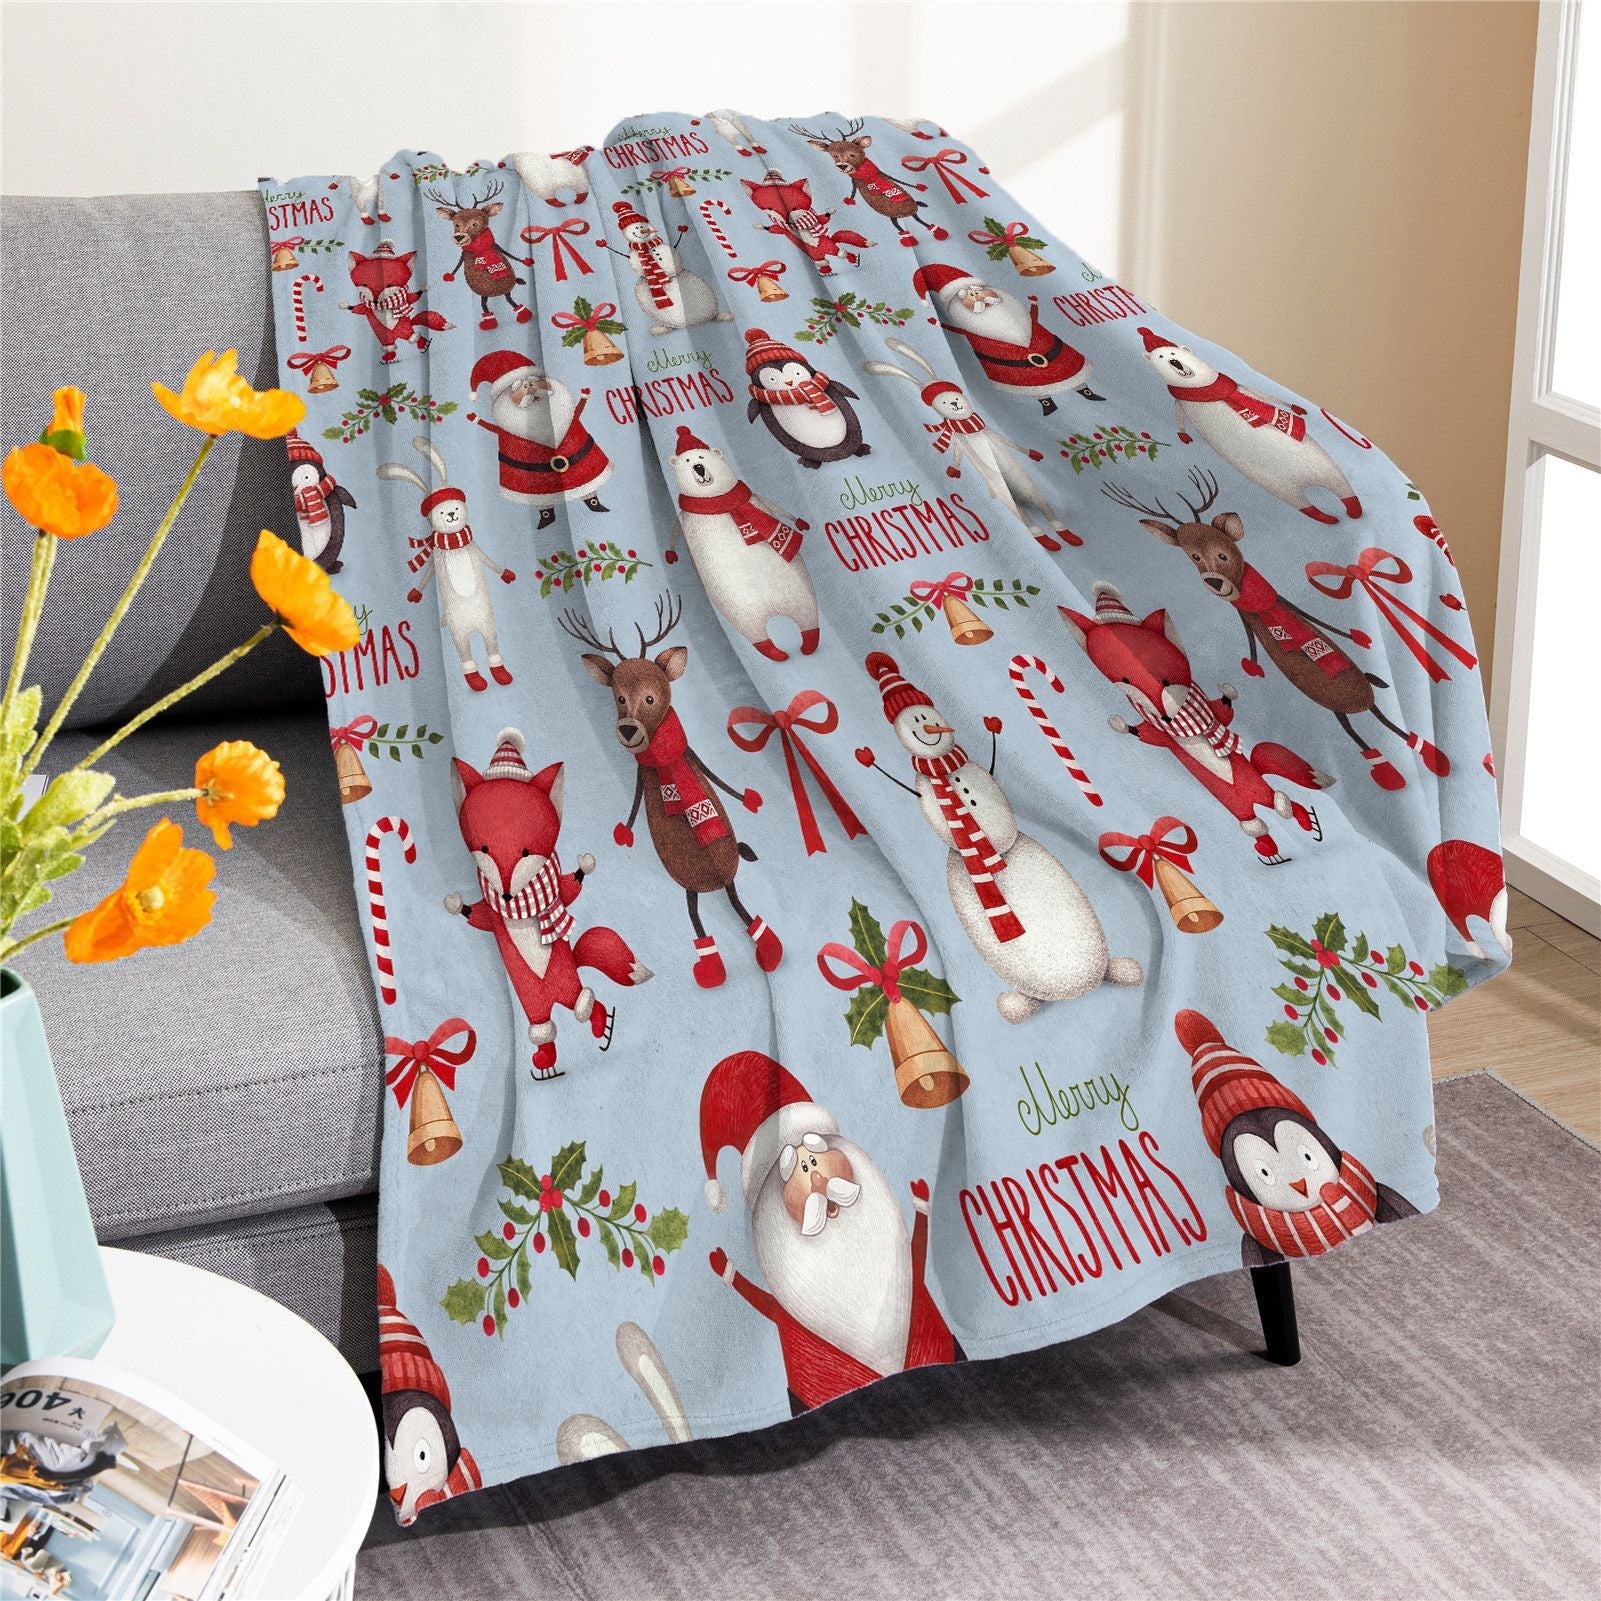 Merry Christmas Soft Fleece Throw Blankets-Blankets-M20220916-10-50*60 inches-Free Shipping at meselling99